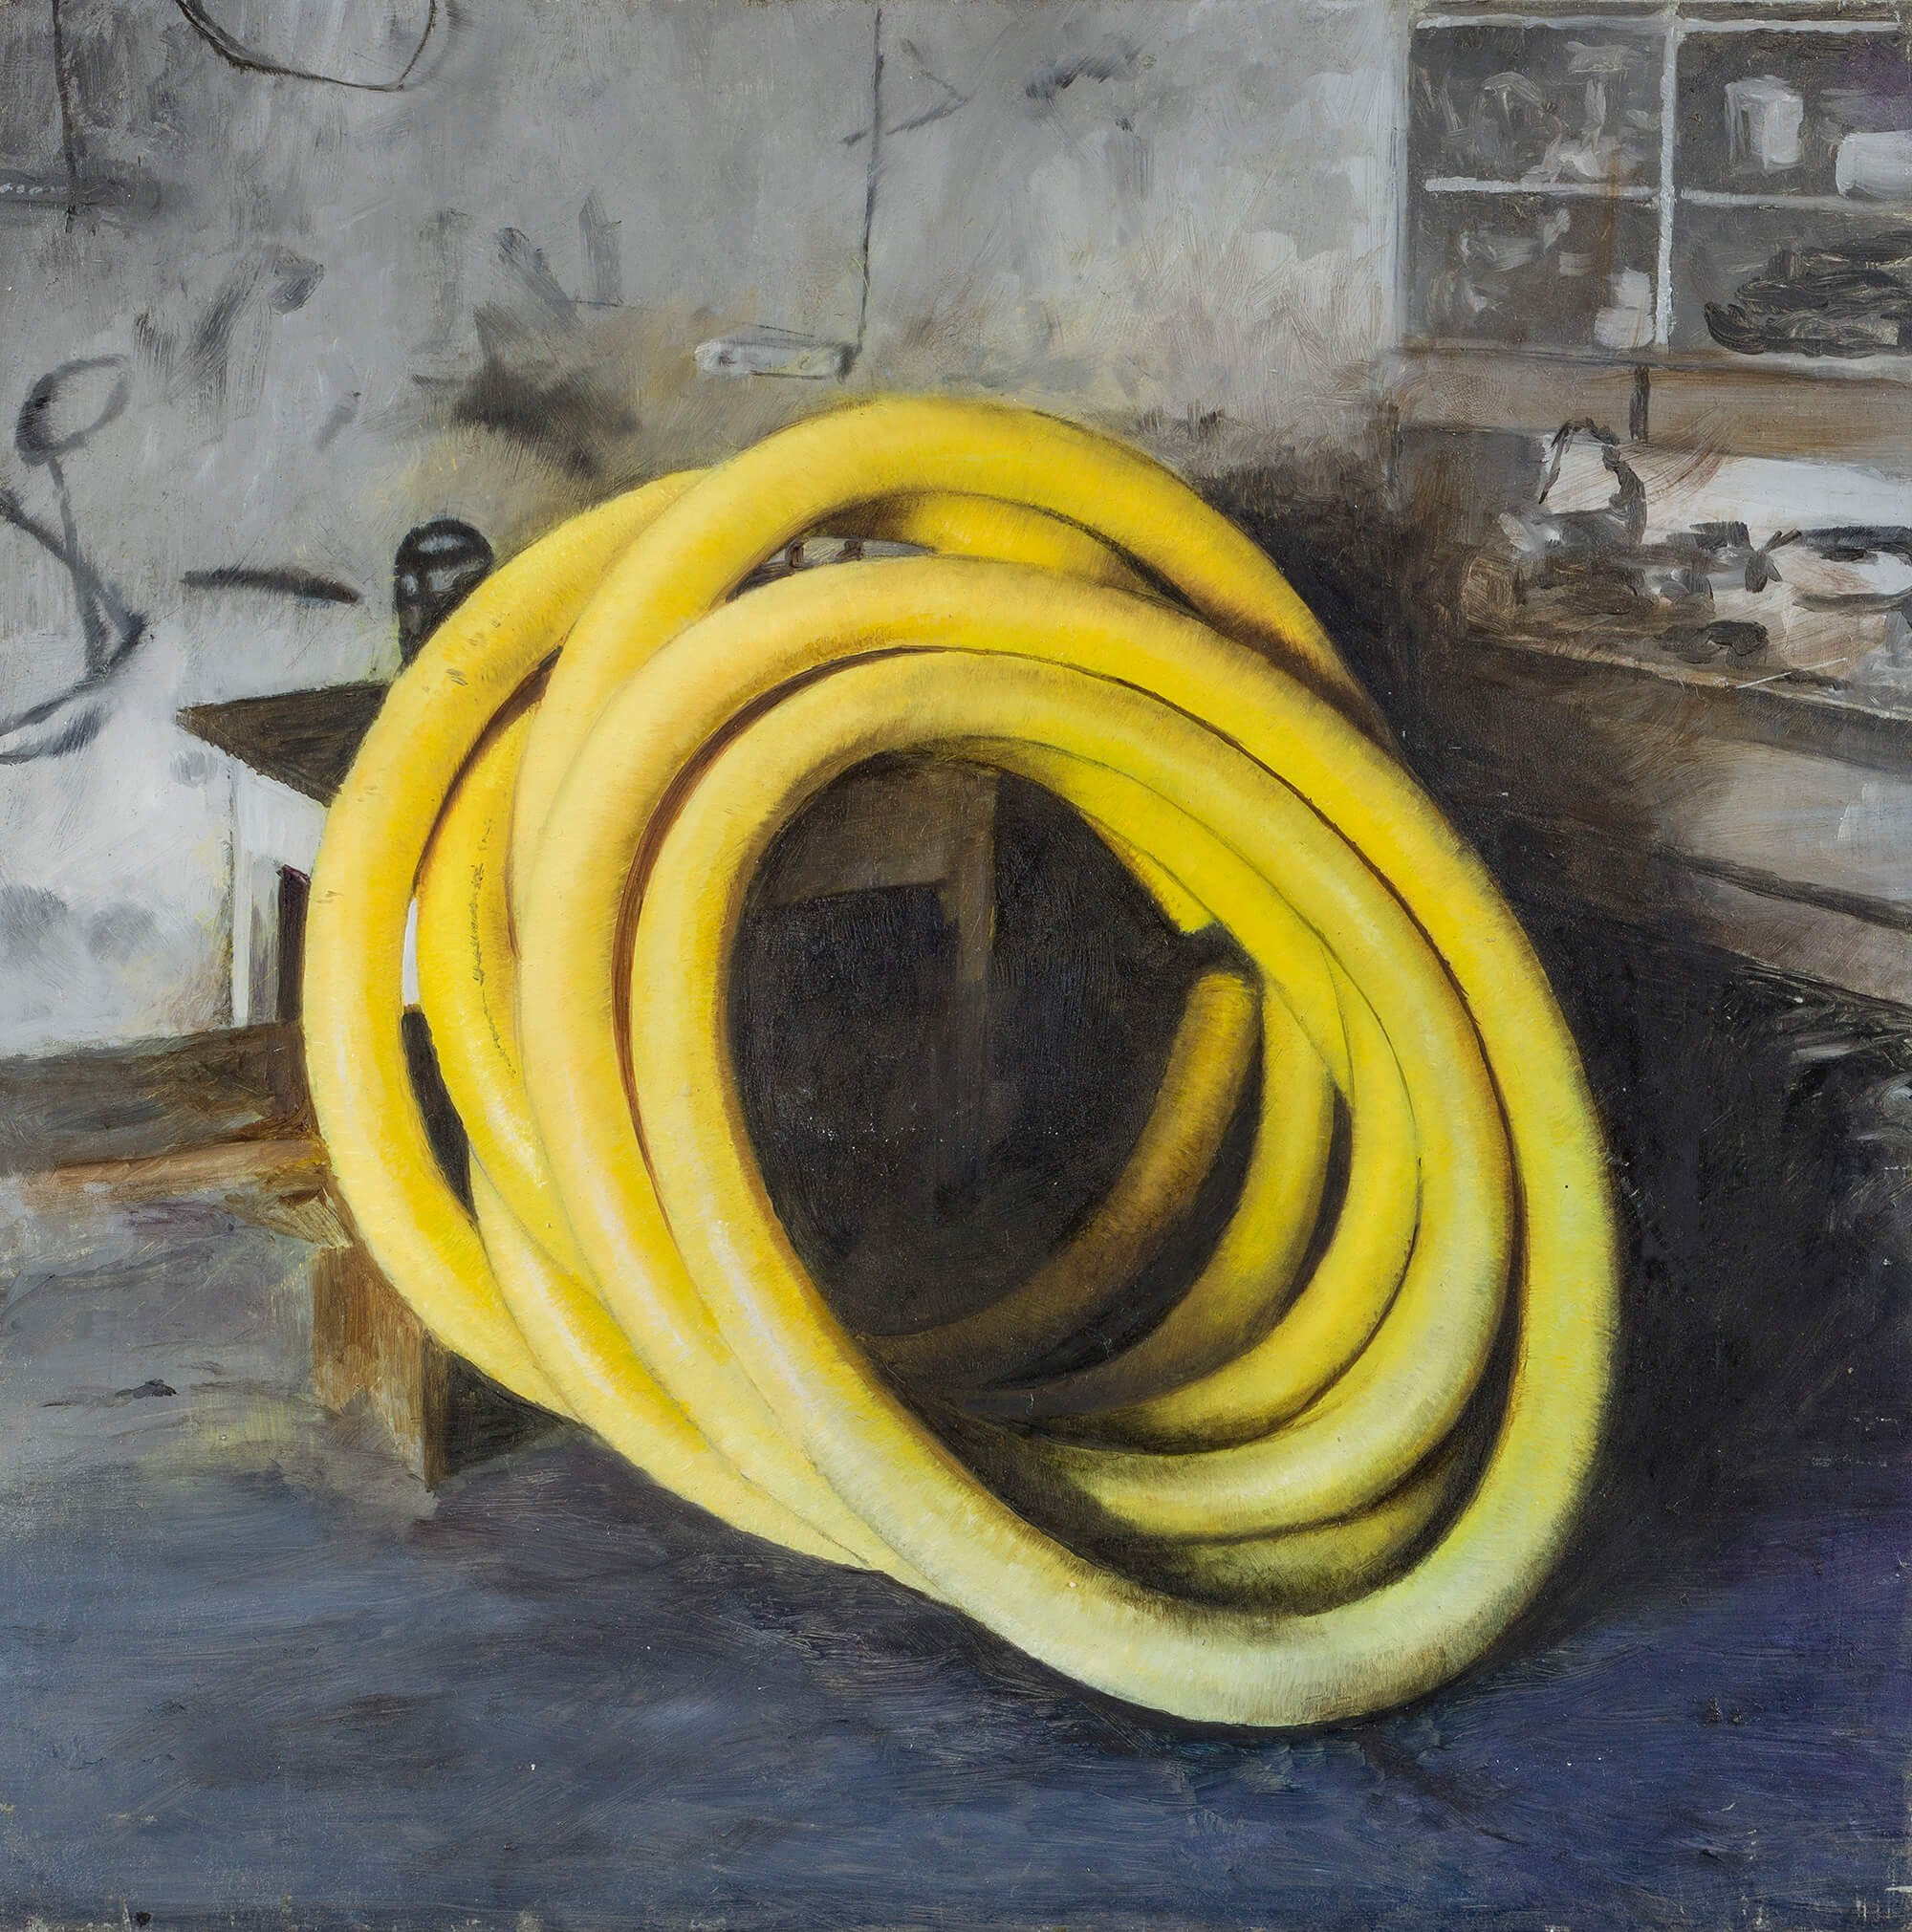 Drainage pipes in a garageolej, oil on galvanized sheet, 22x22cm 2021